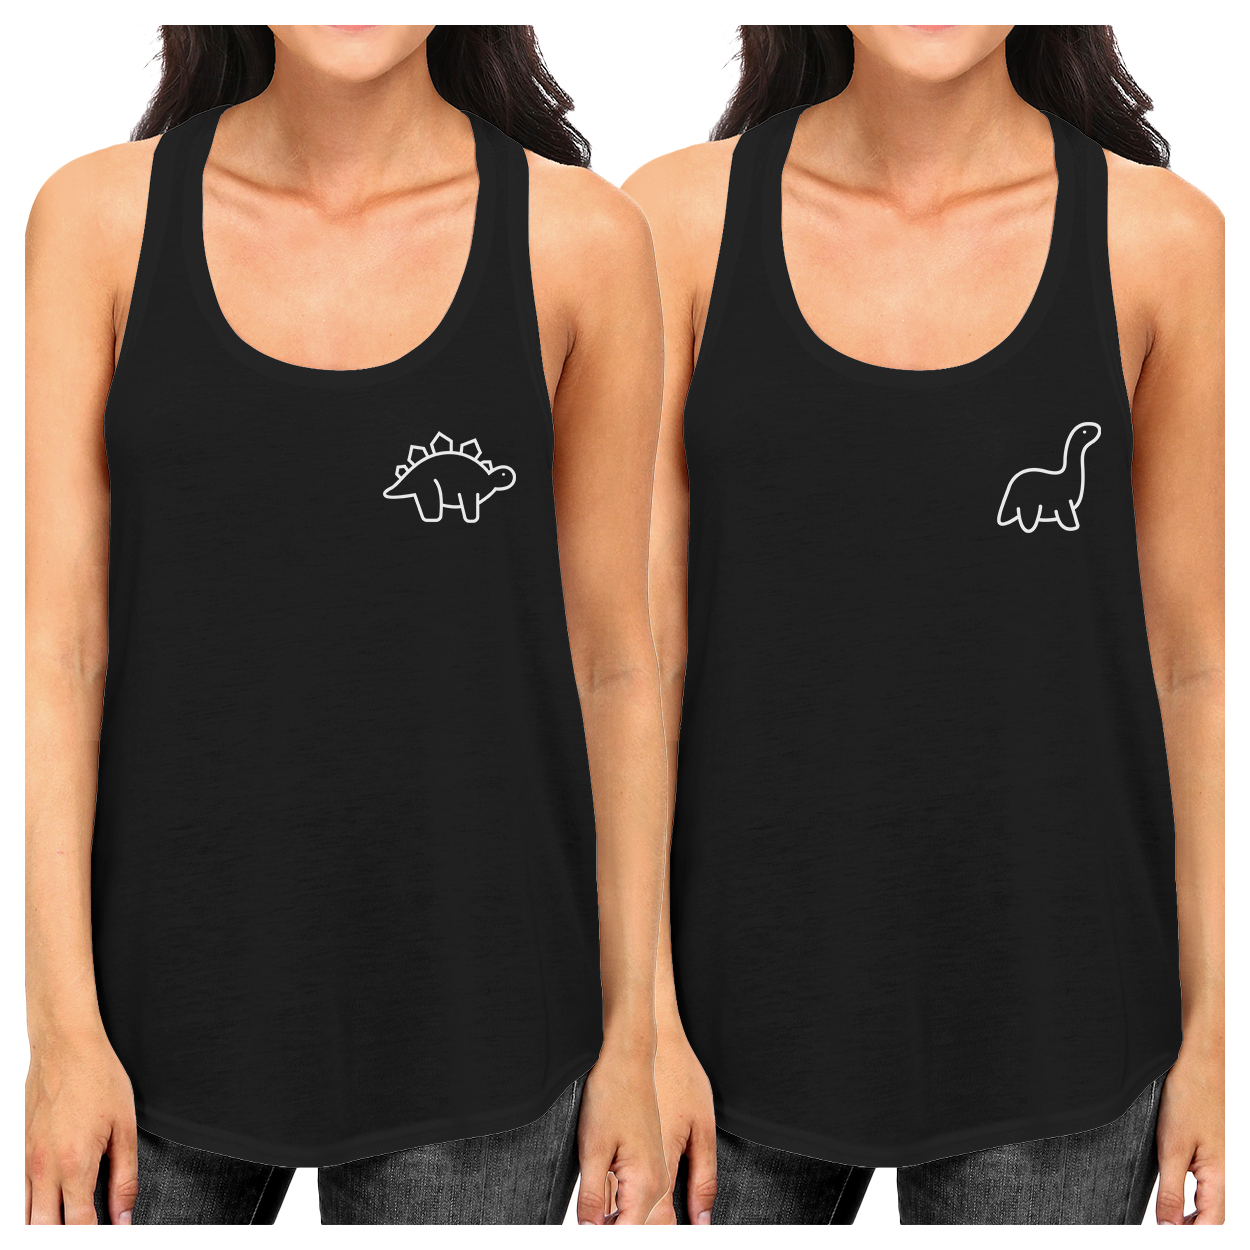 Dinosaurs White Funny Graphic Best Friend Matching Tank Top Gifts - image 1 of 4